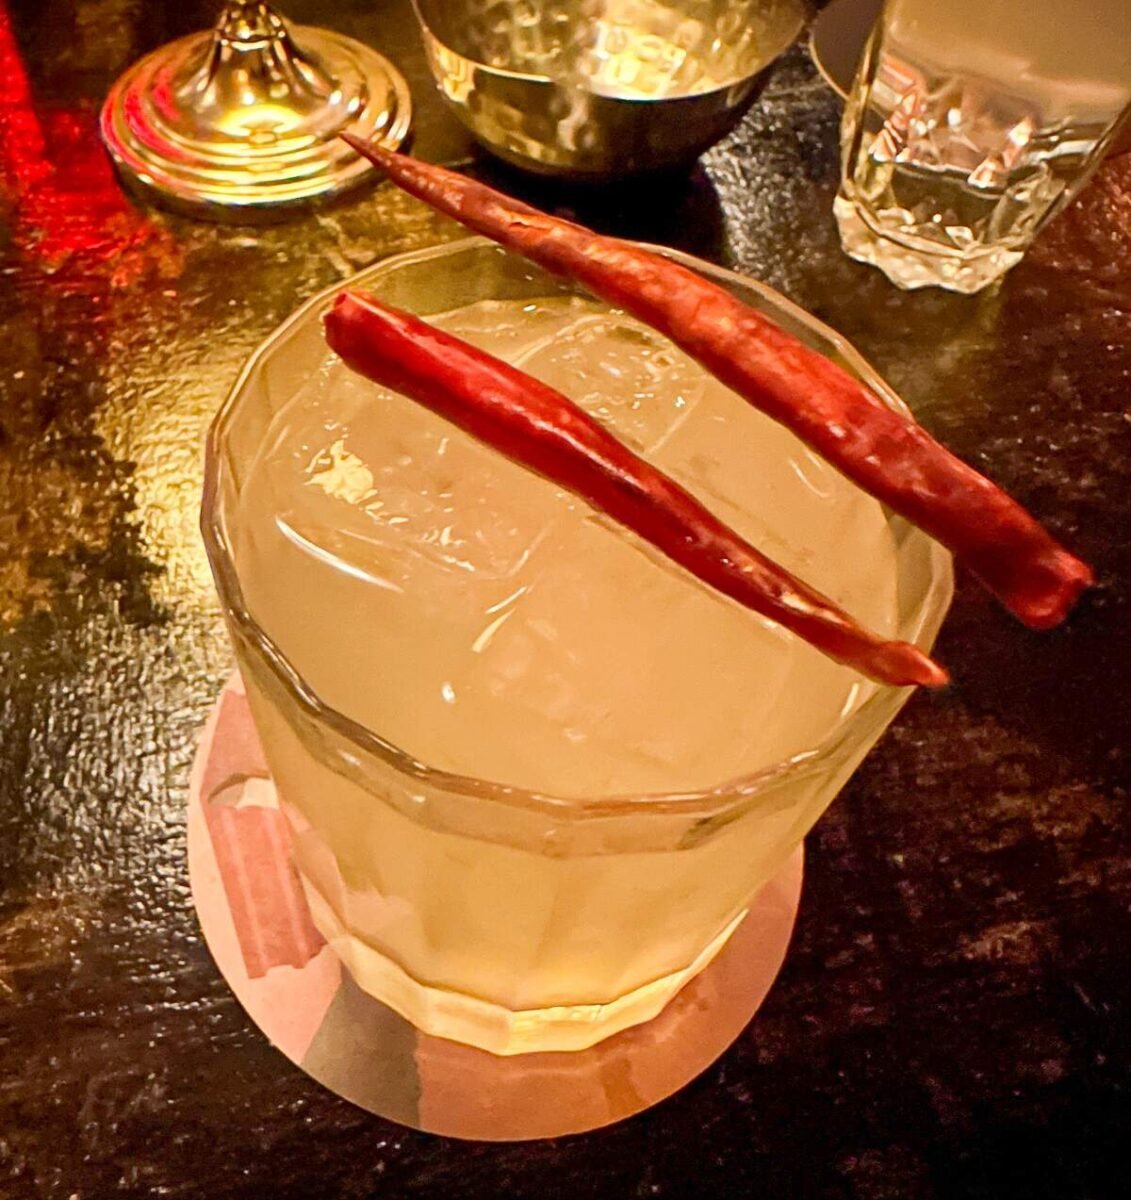 A spicy cocktail at Keys & Heels, a speakeasy in the Upper East Side of New York City, garnished with two red chili peppers and served over ice in a glass.